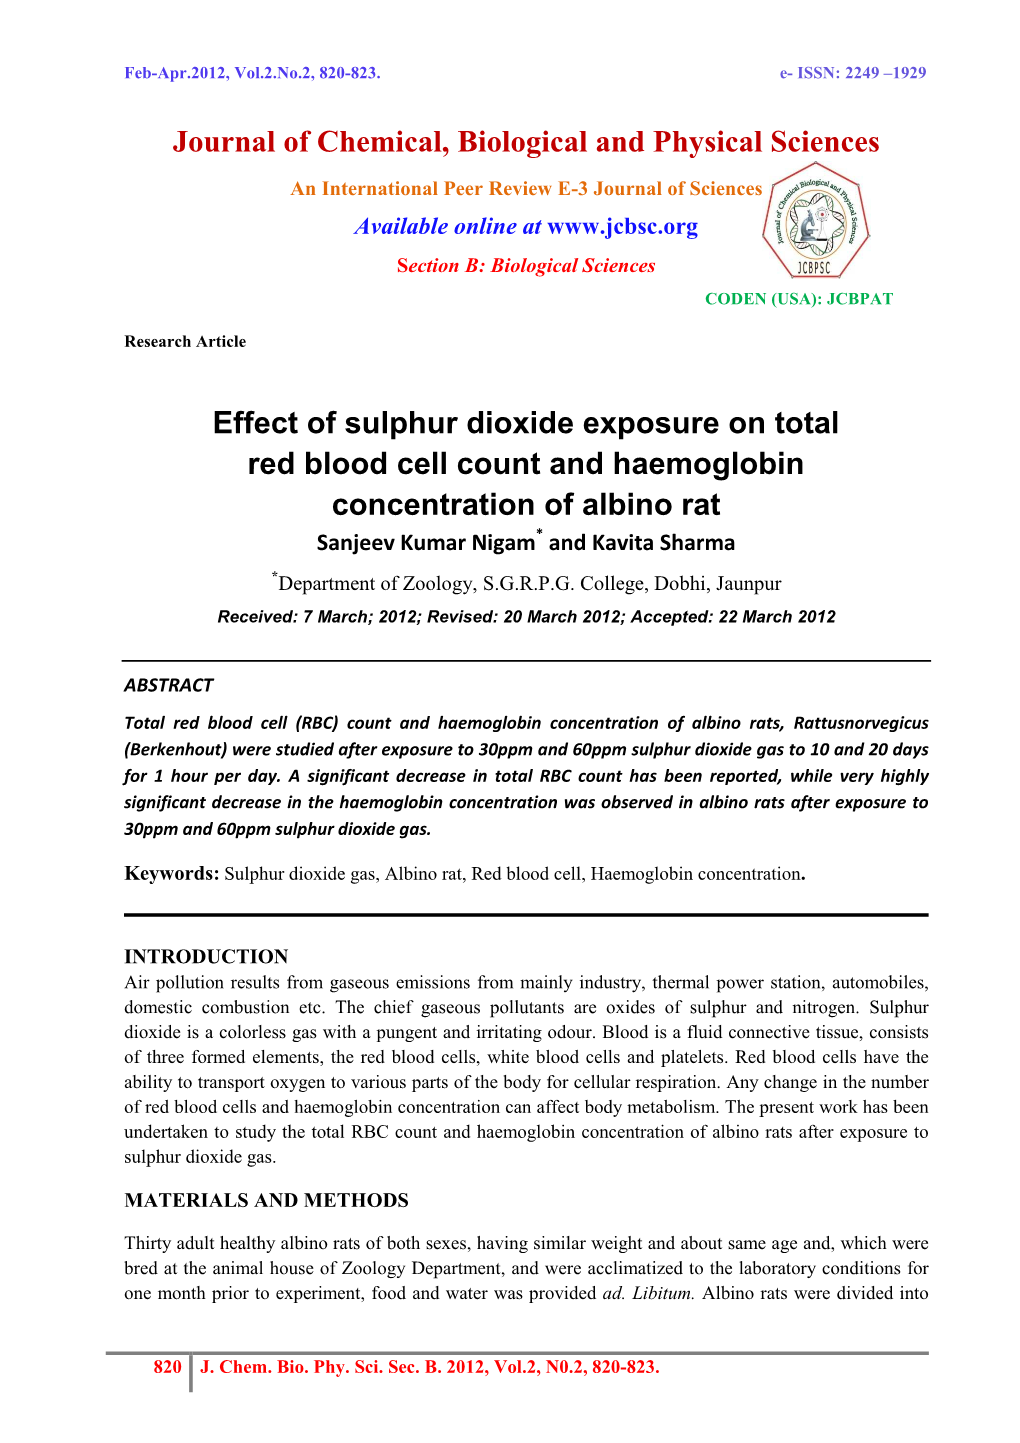 Effect of Sulphur Dioxide Exposure on Total Red Blood Cell Count And